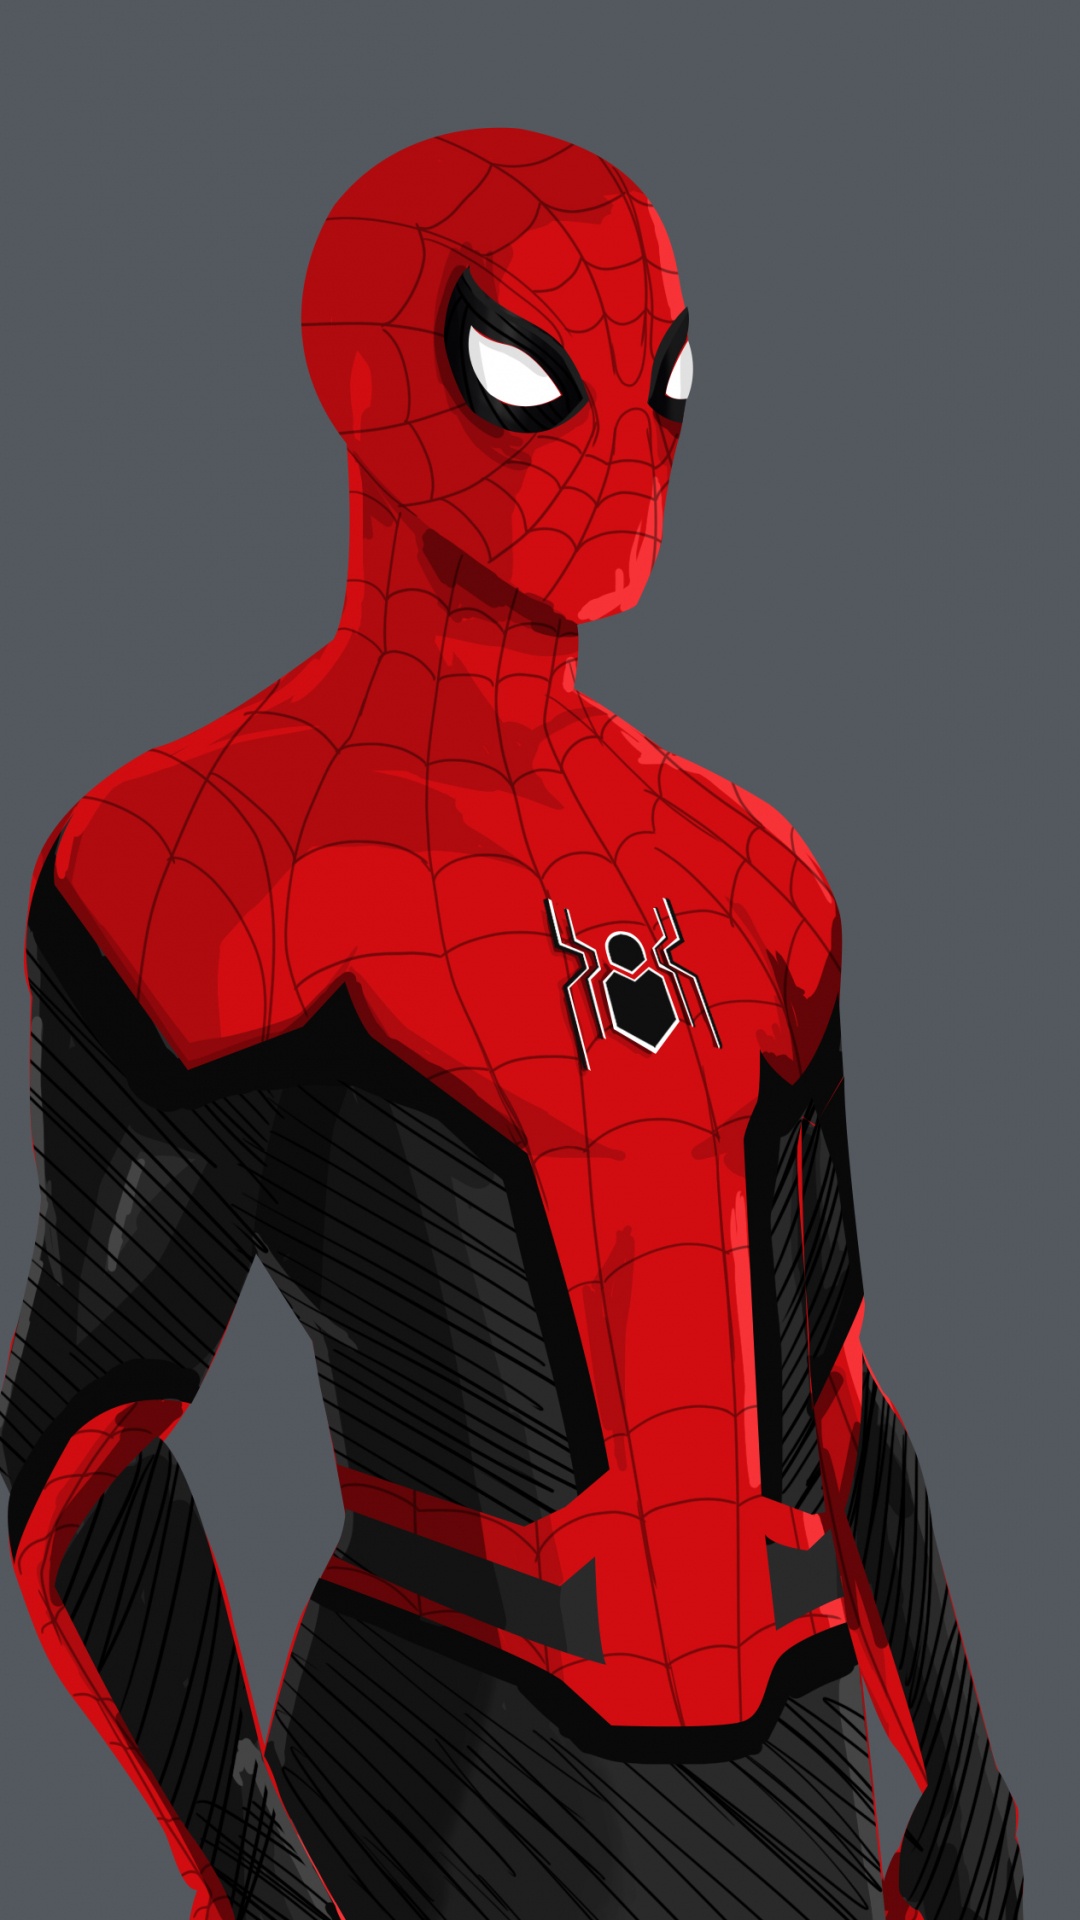 Red and Black Spider Man Illustration. Wallpaper in 1080x1920 Resolution